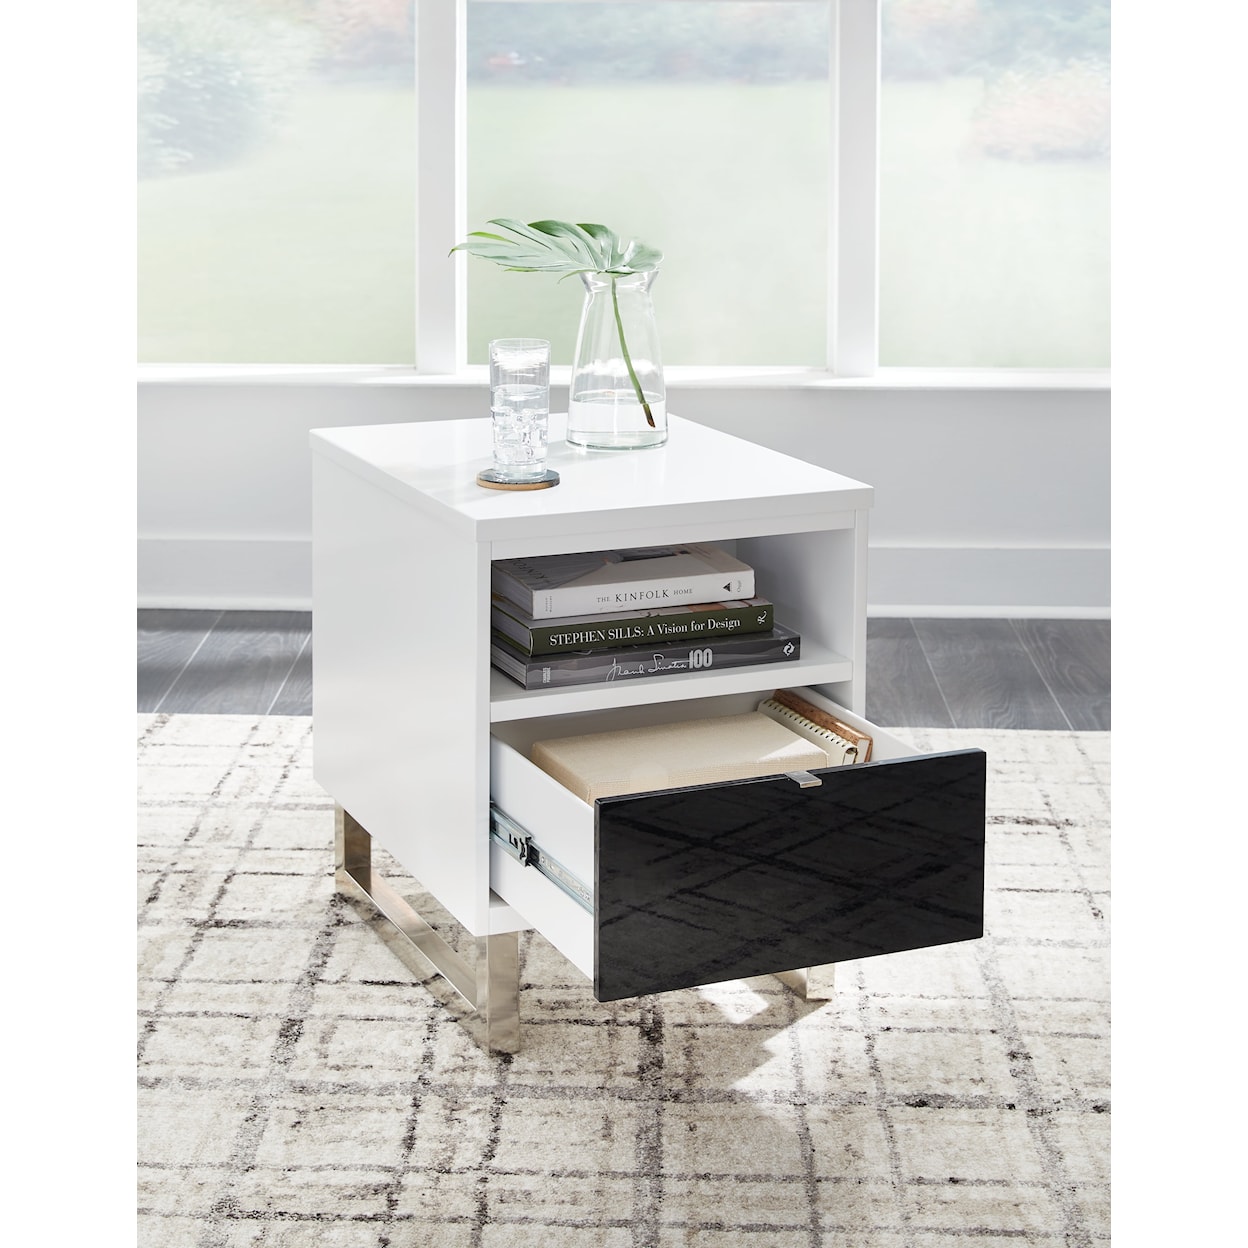 Signature Design by Ashley Furniture Gardoni Chairside End Table